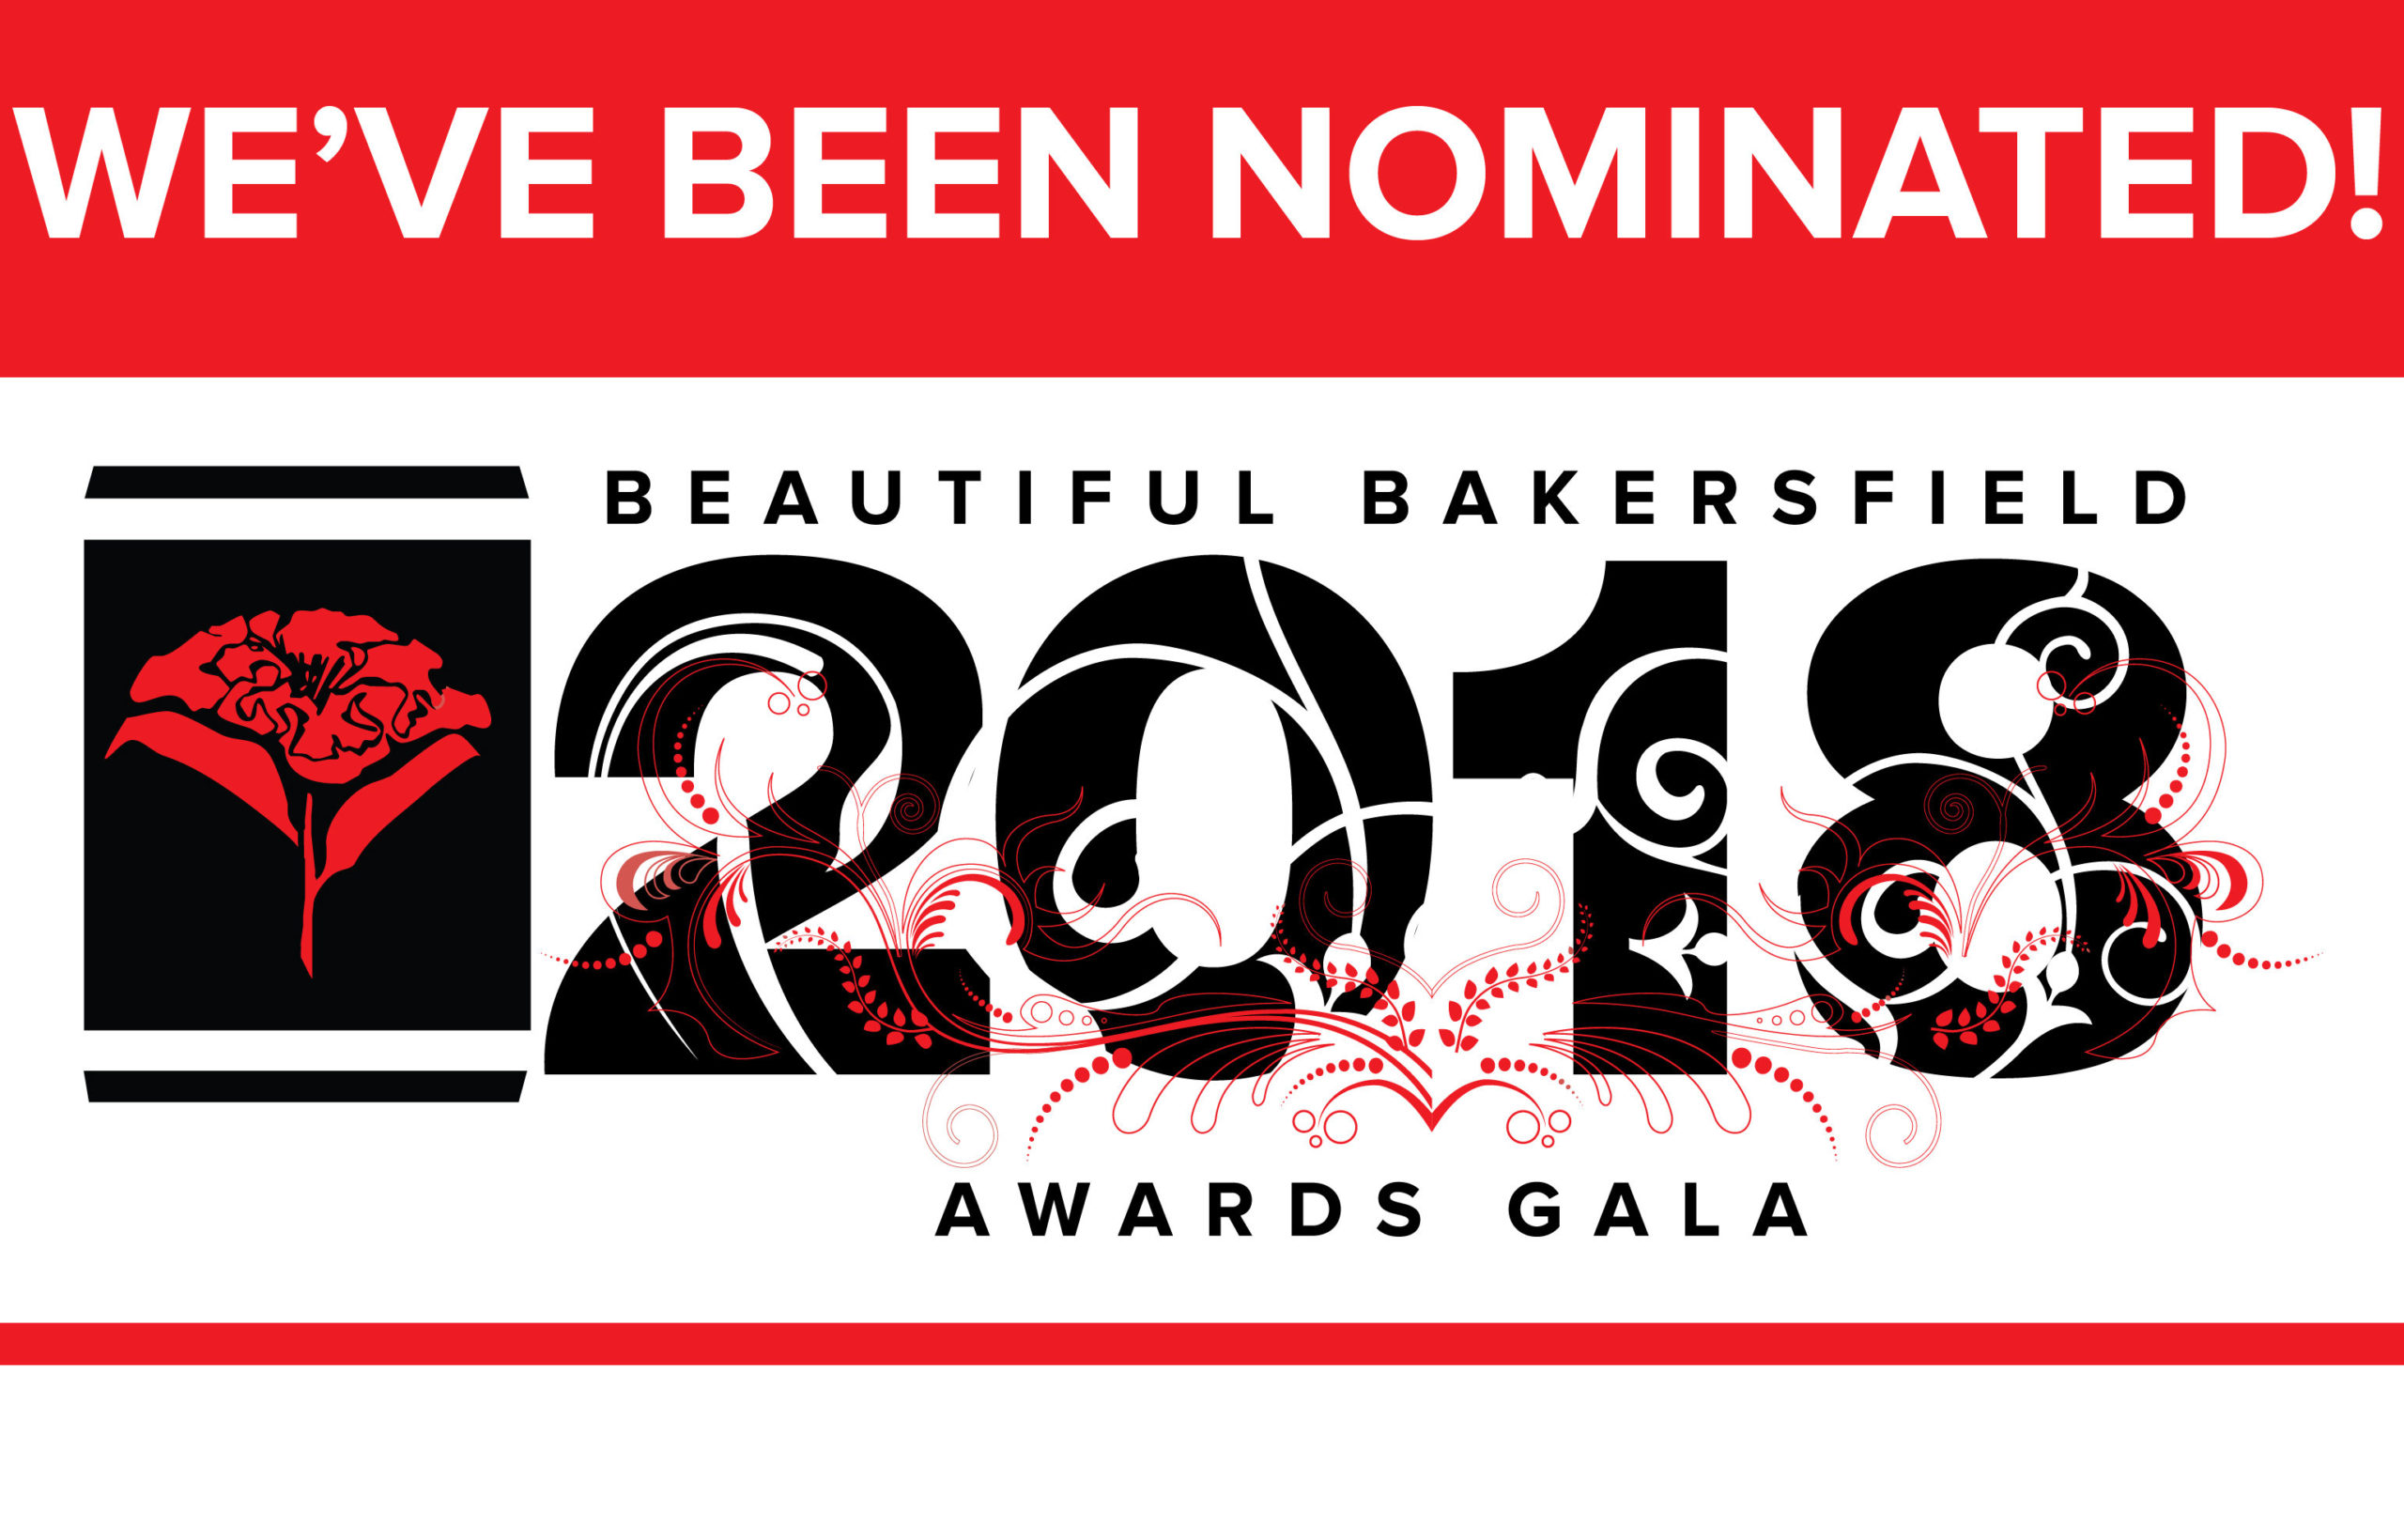 Chain | Cohn | Clark nominated as ‘Corporation of the Year’ in 2018 Beautiful Bakersfield Awards